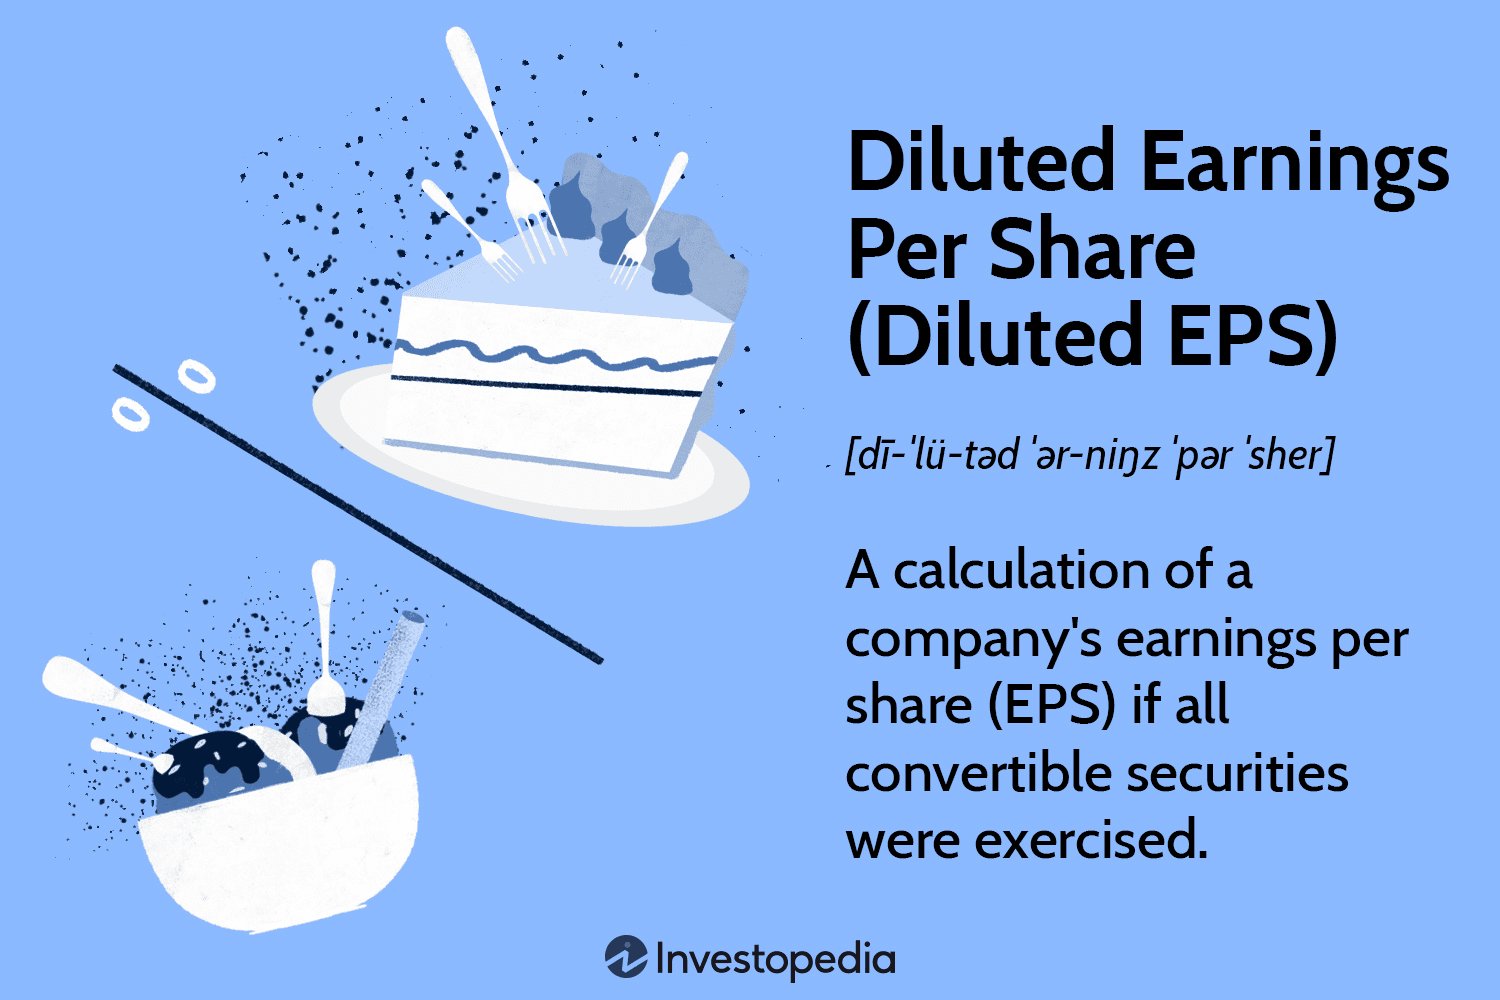 Diluted Shares